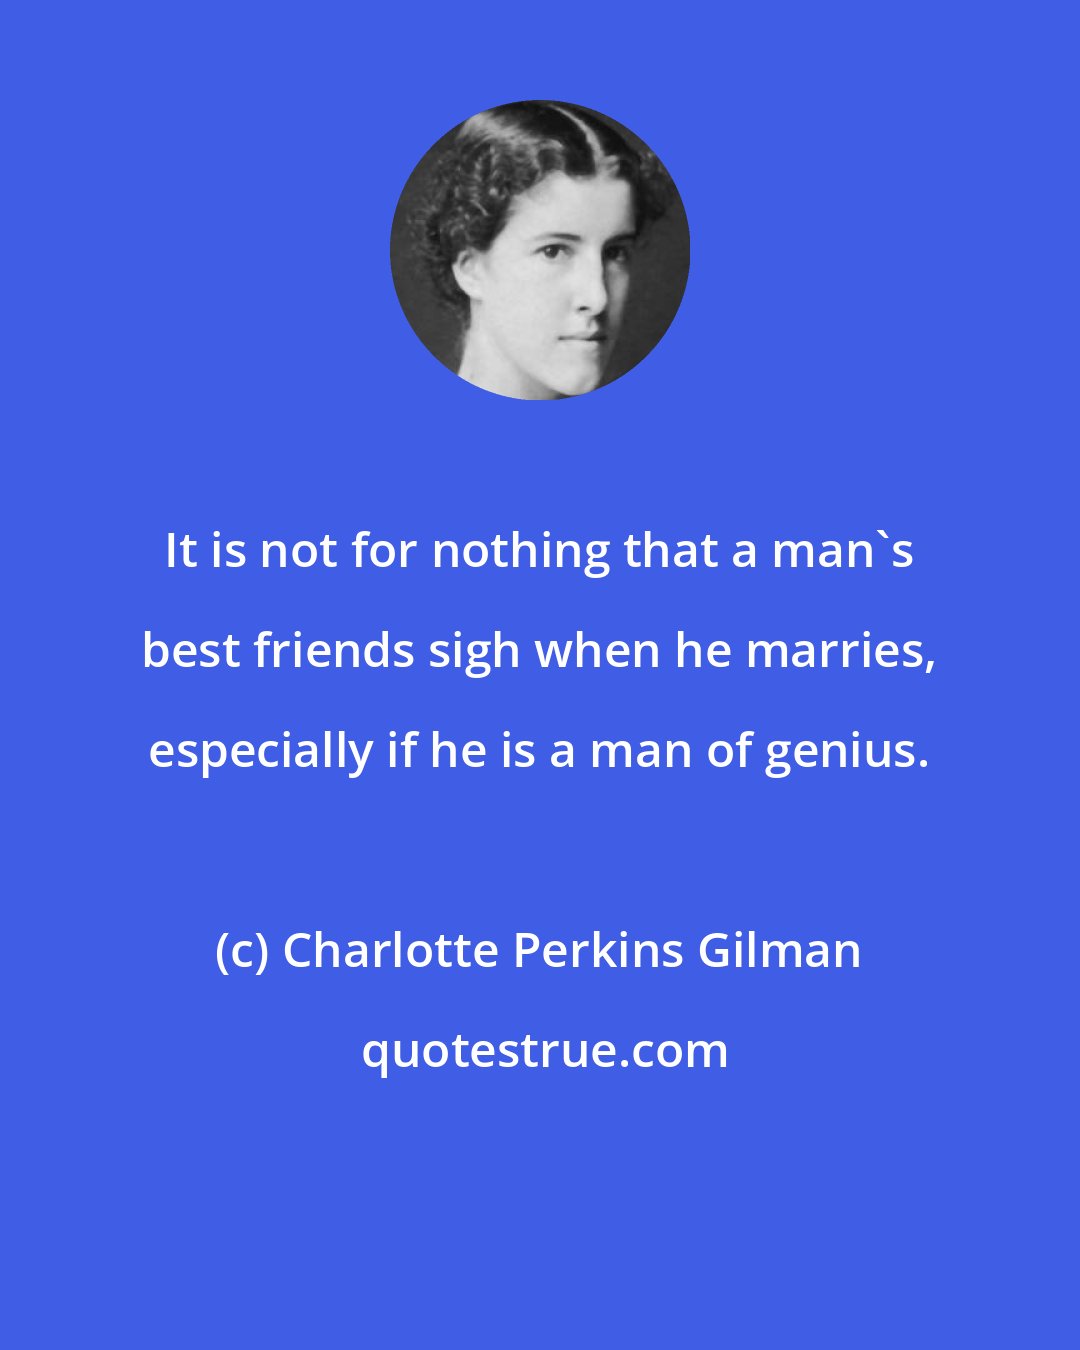 Charlotte Perkins Gilman: It is not for nothing that a man's best friends sigh when he marries, especially if he is a man of genius.